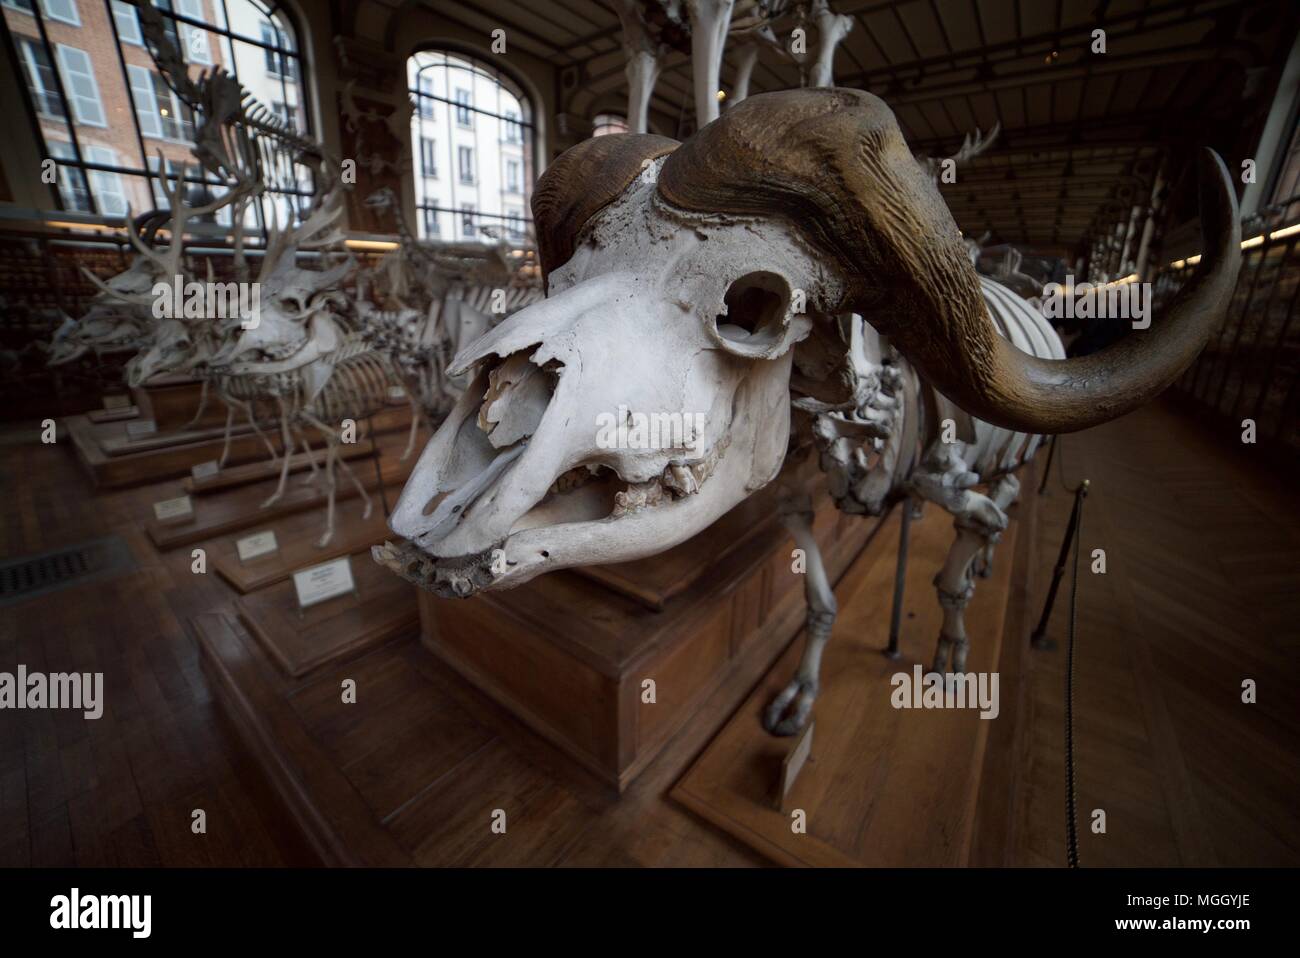 A Buffalo skeleton amongst the many skeletons of animals inside the National Museum of Natural History in Paris. Bones and skeletons of animals. Stock Photo